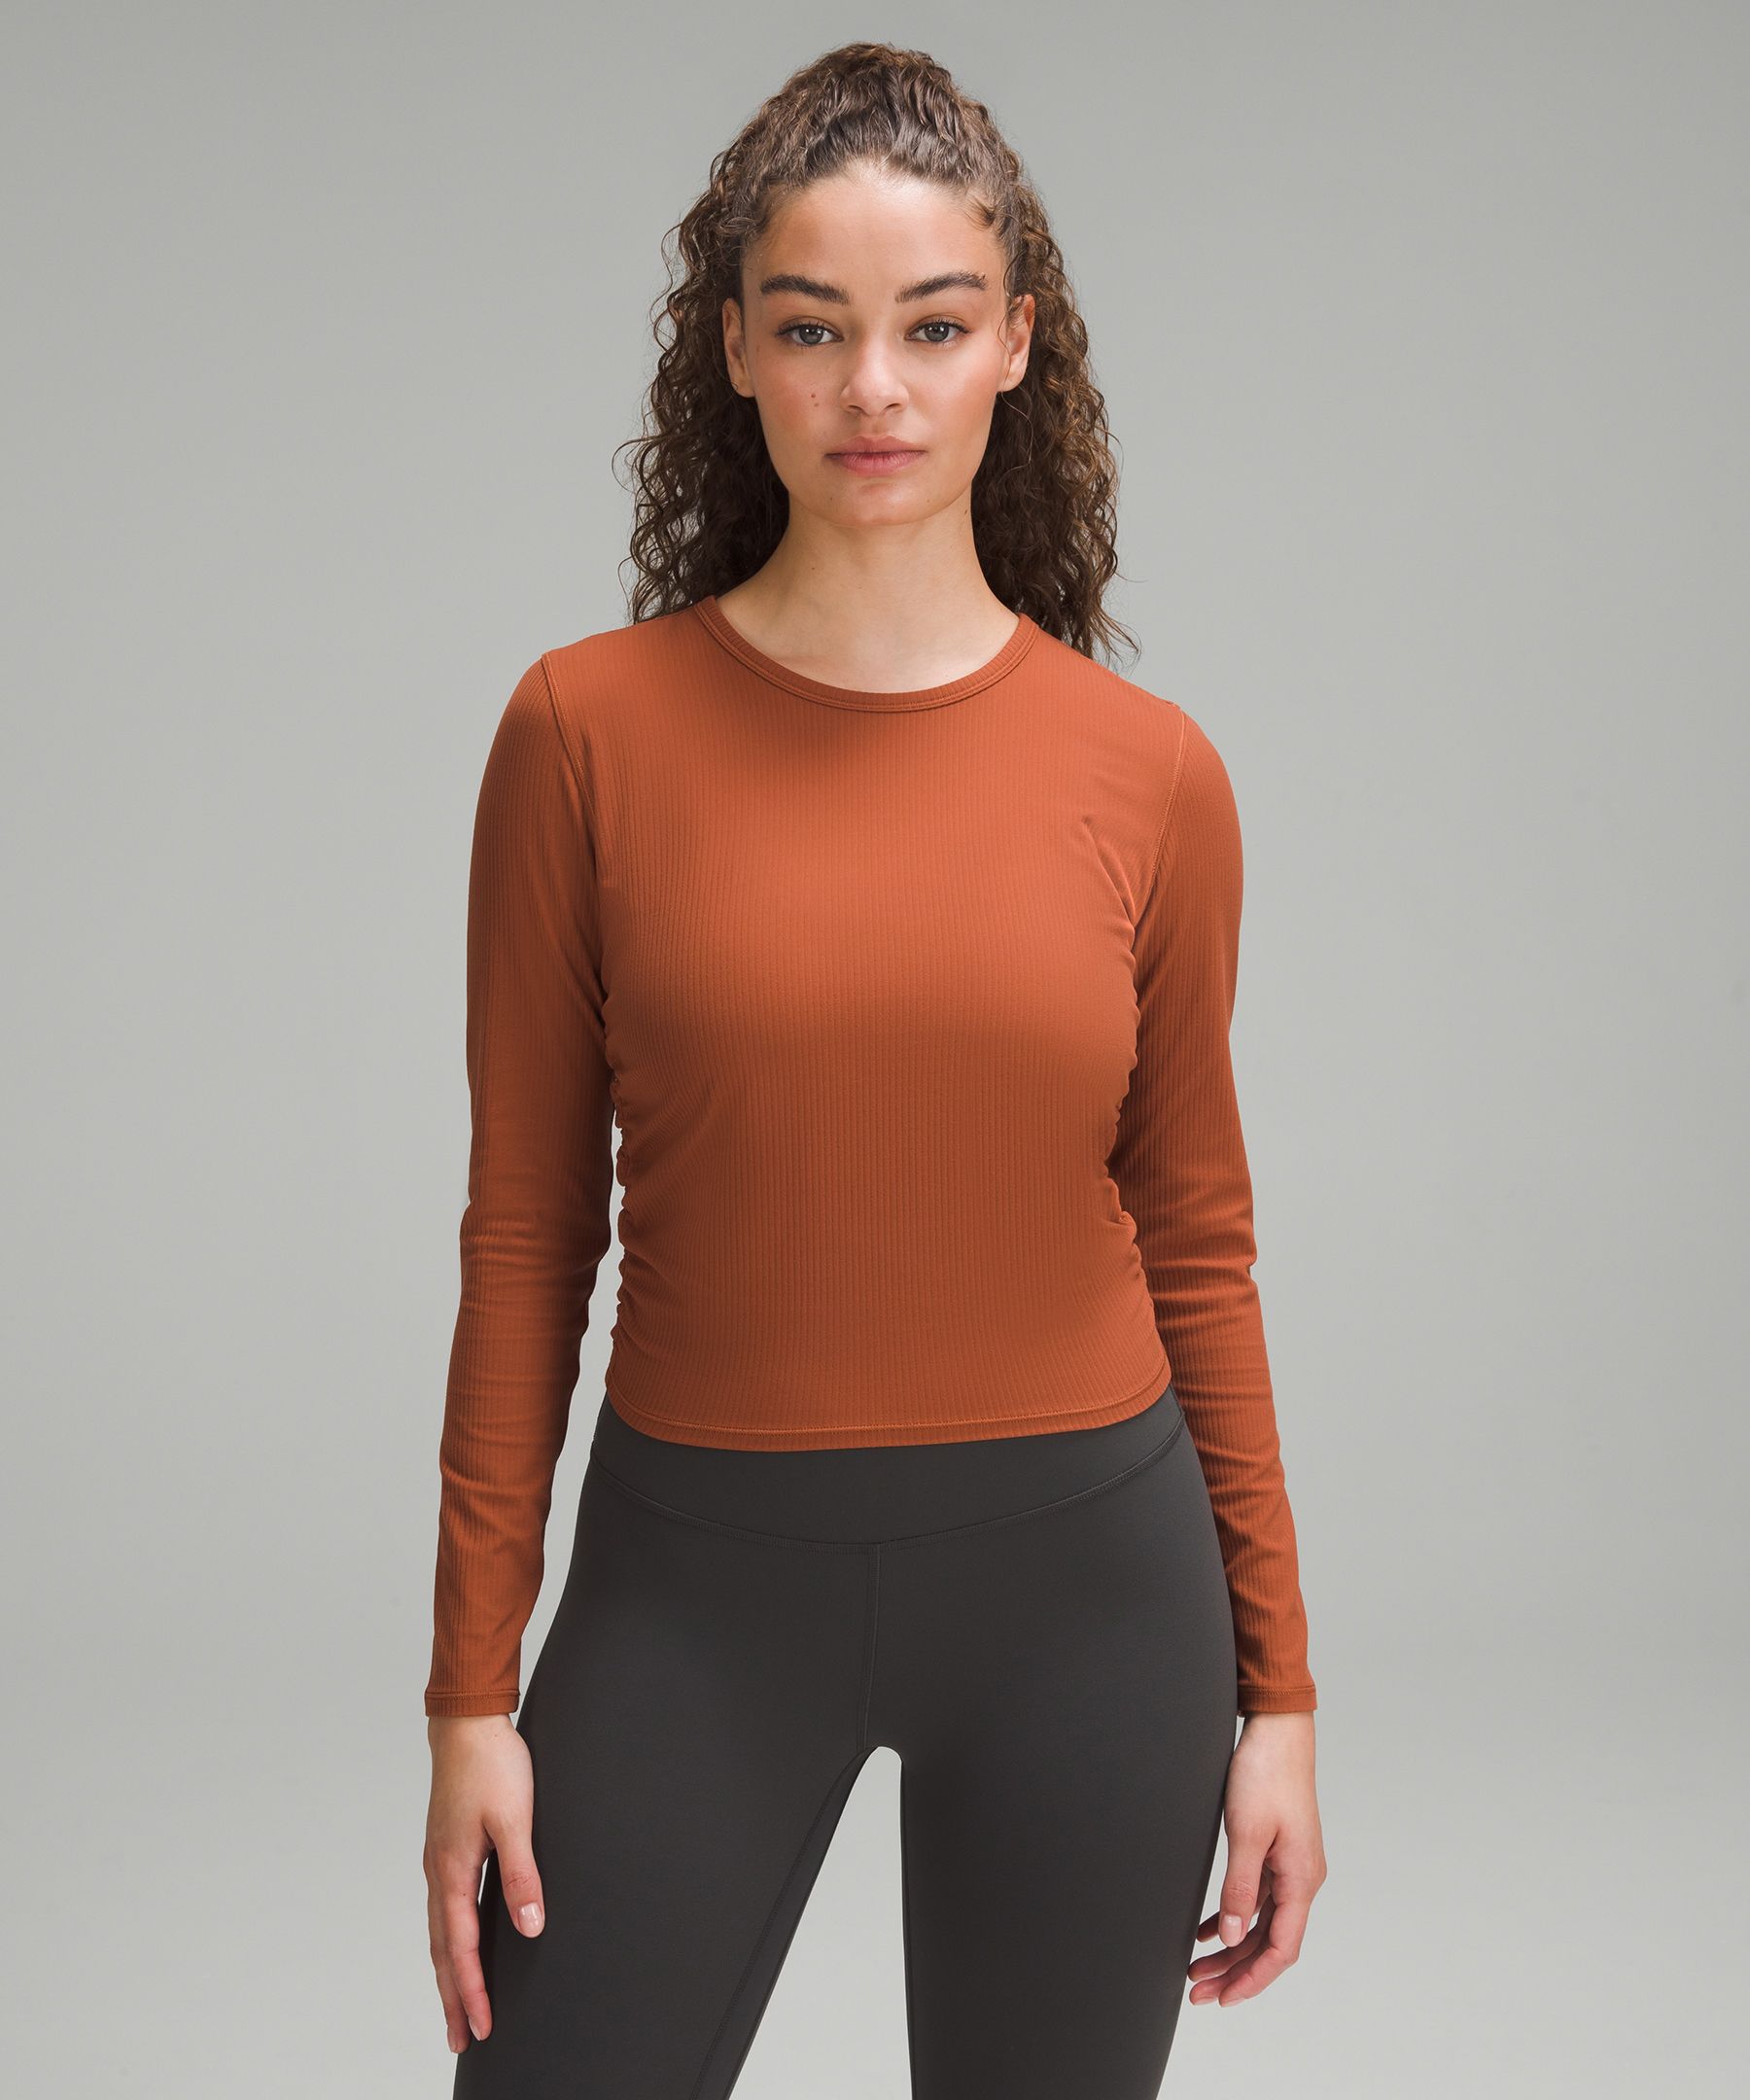 LULULEMON All It Takes Ribbed Nulu Long-Sleeve Shirt Size 10 for Women